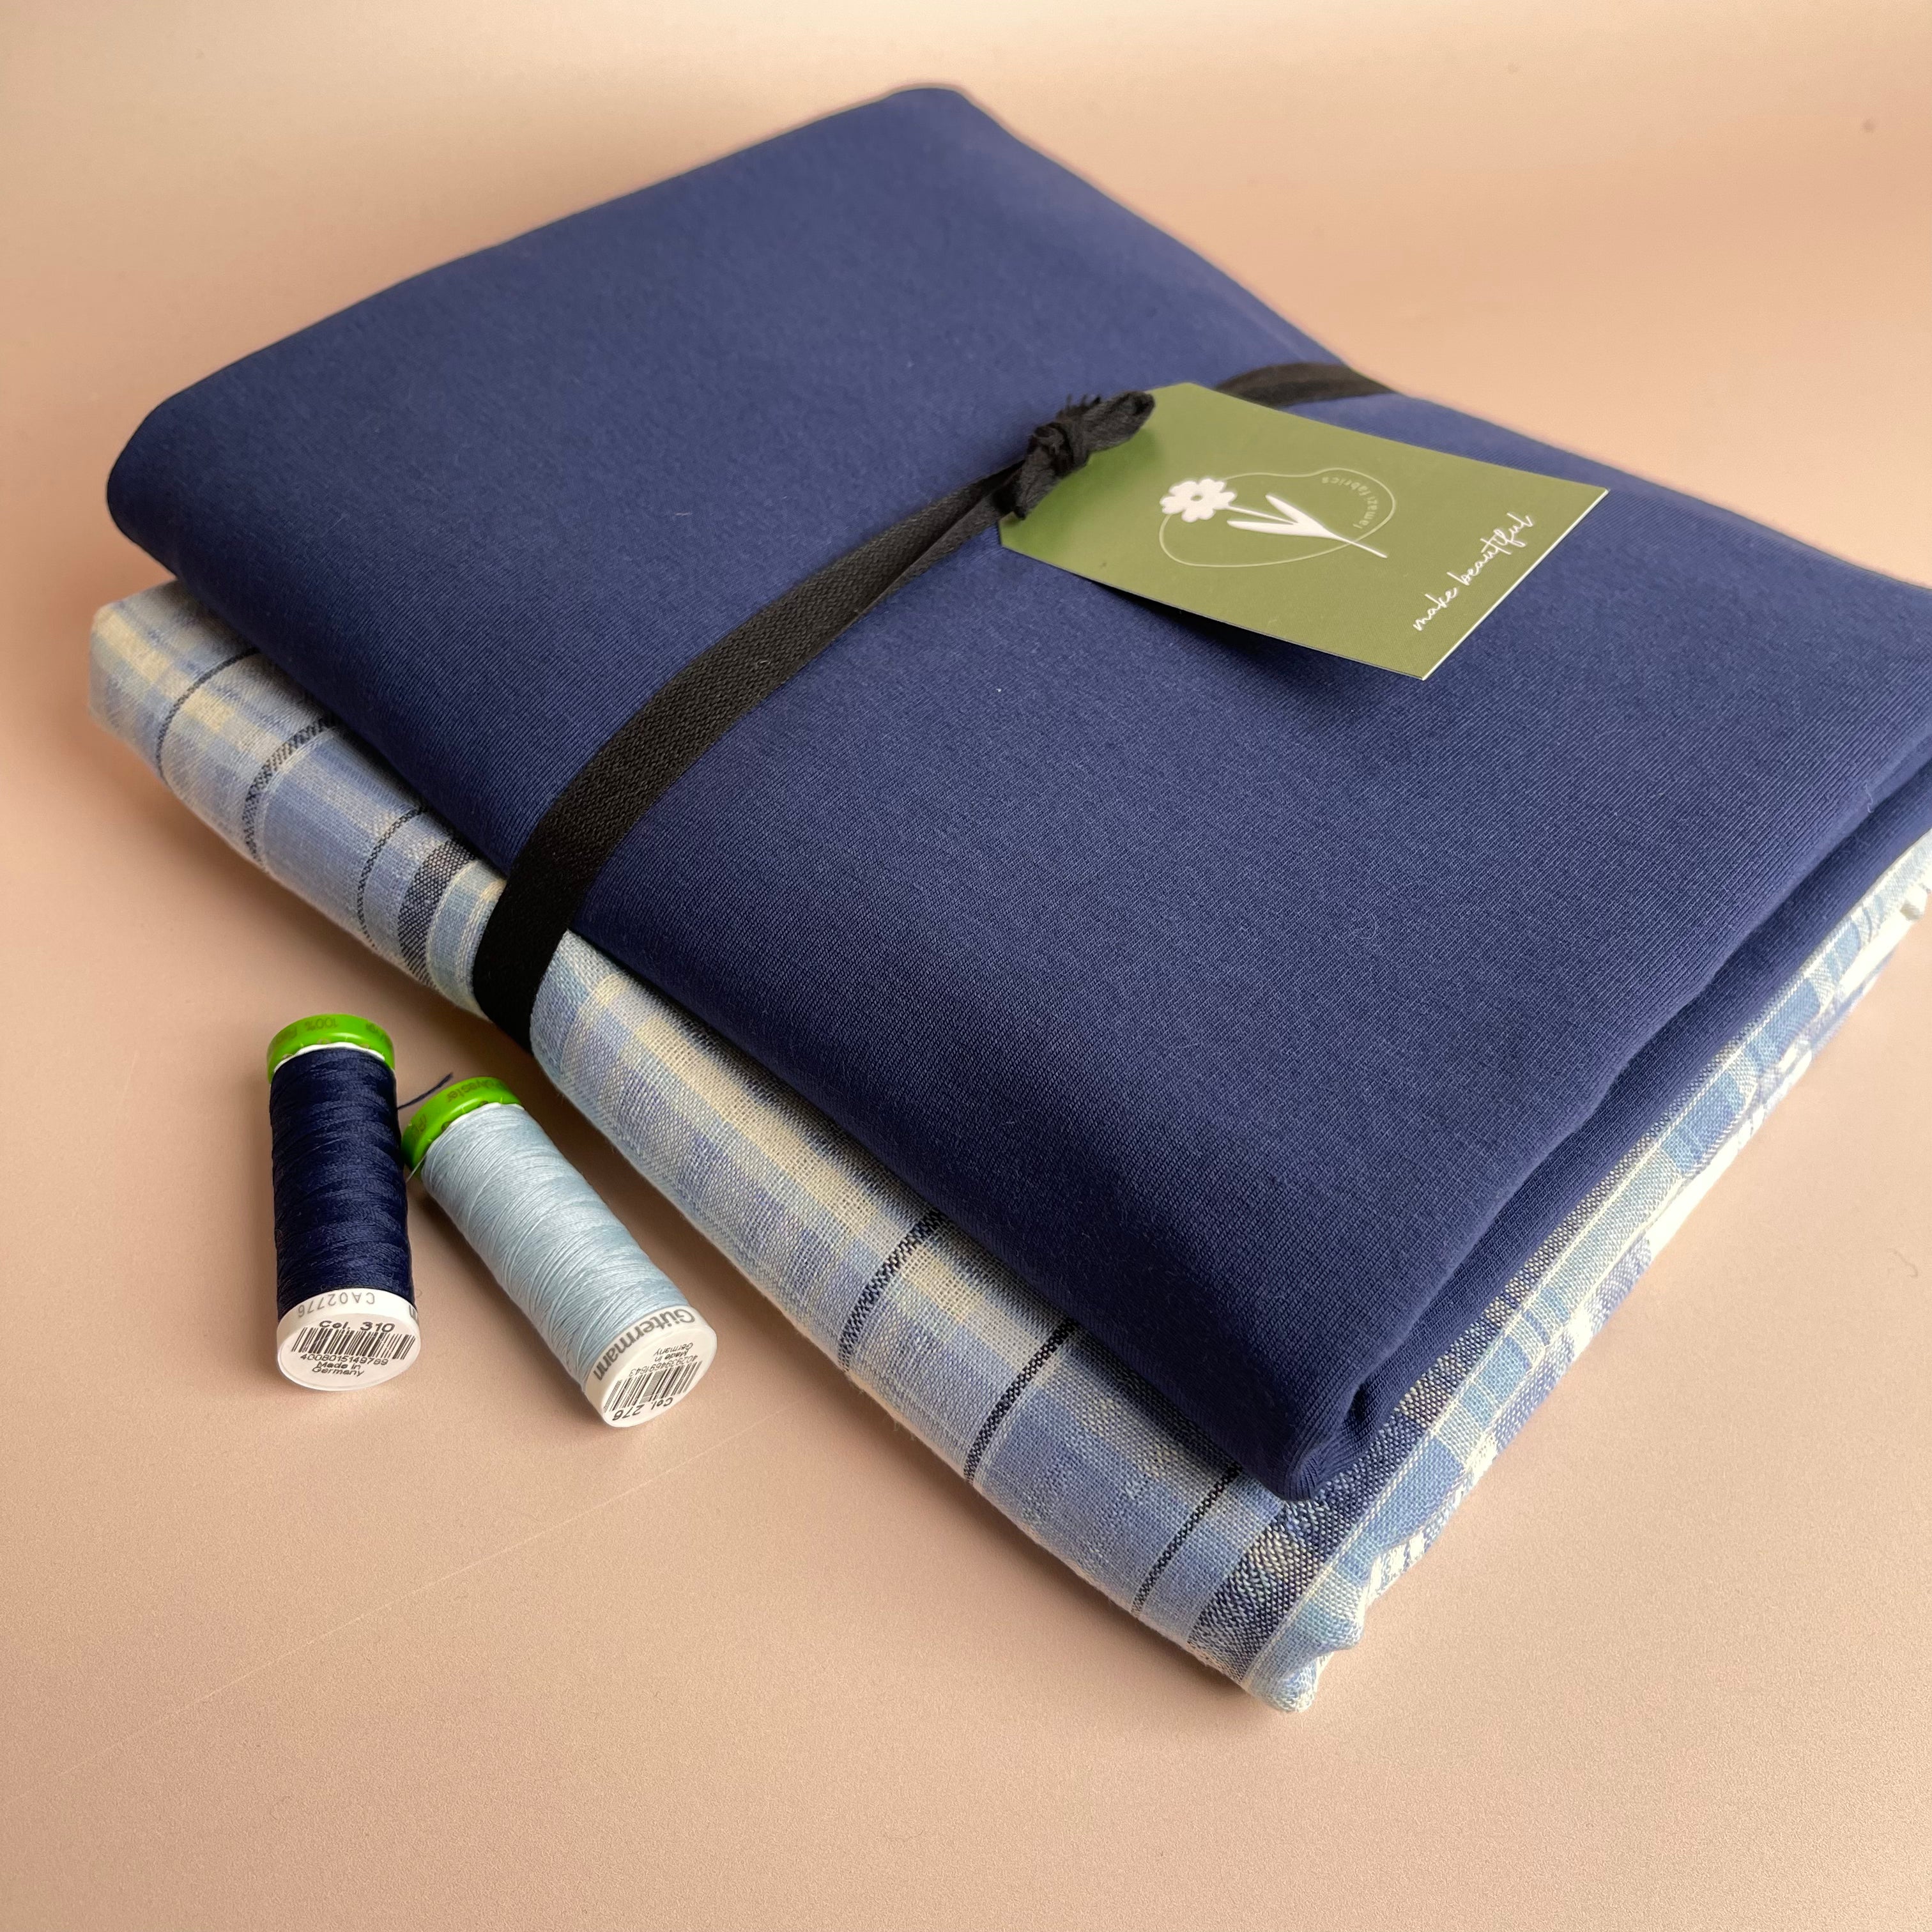 Limited Edition - Luxury Pyjama Kit with yarn Died Blue Check Cotton